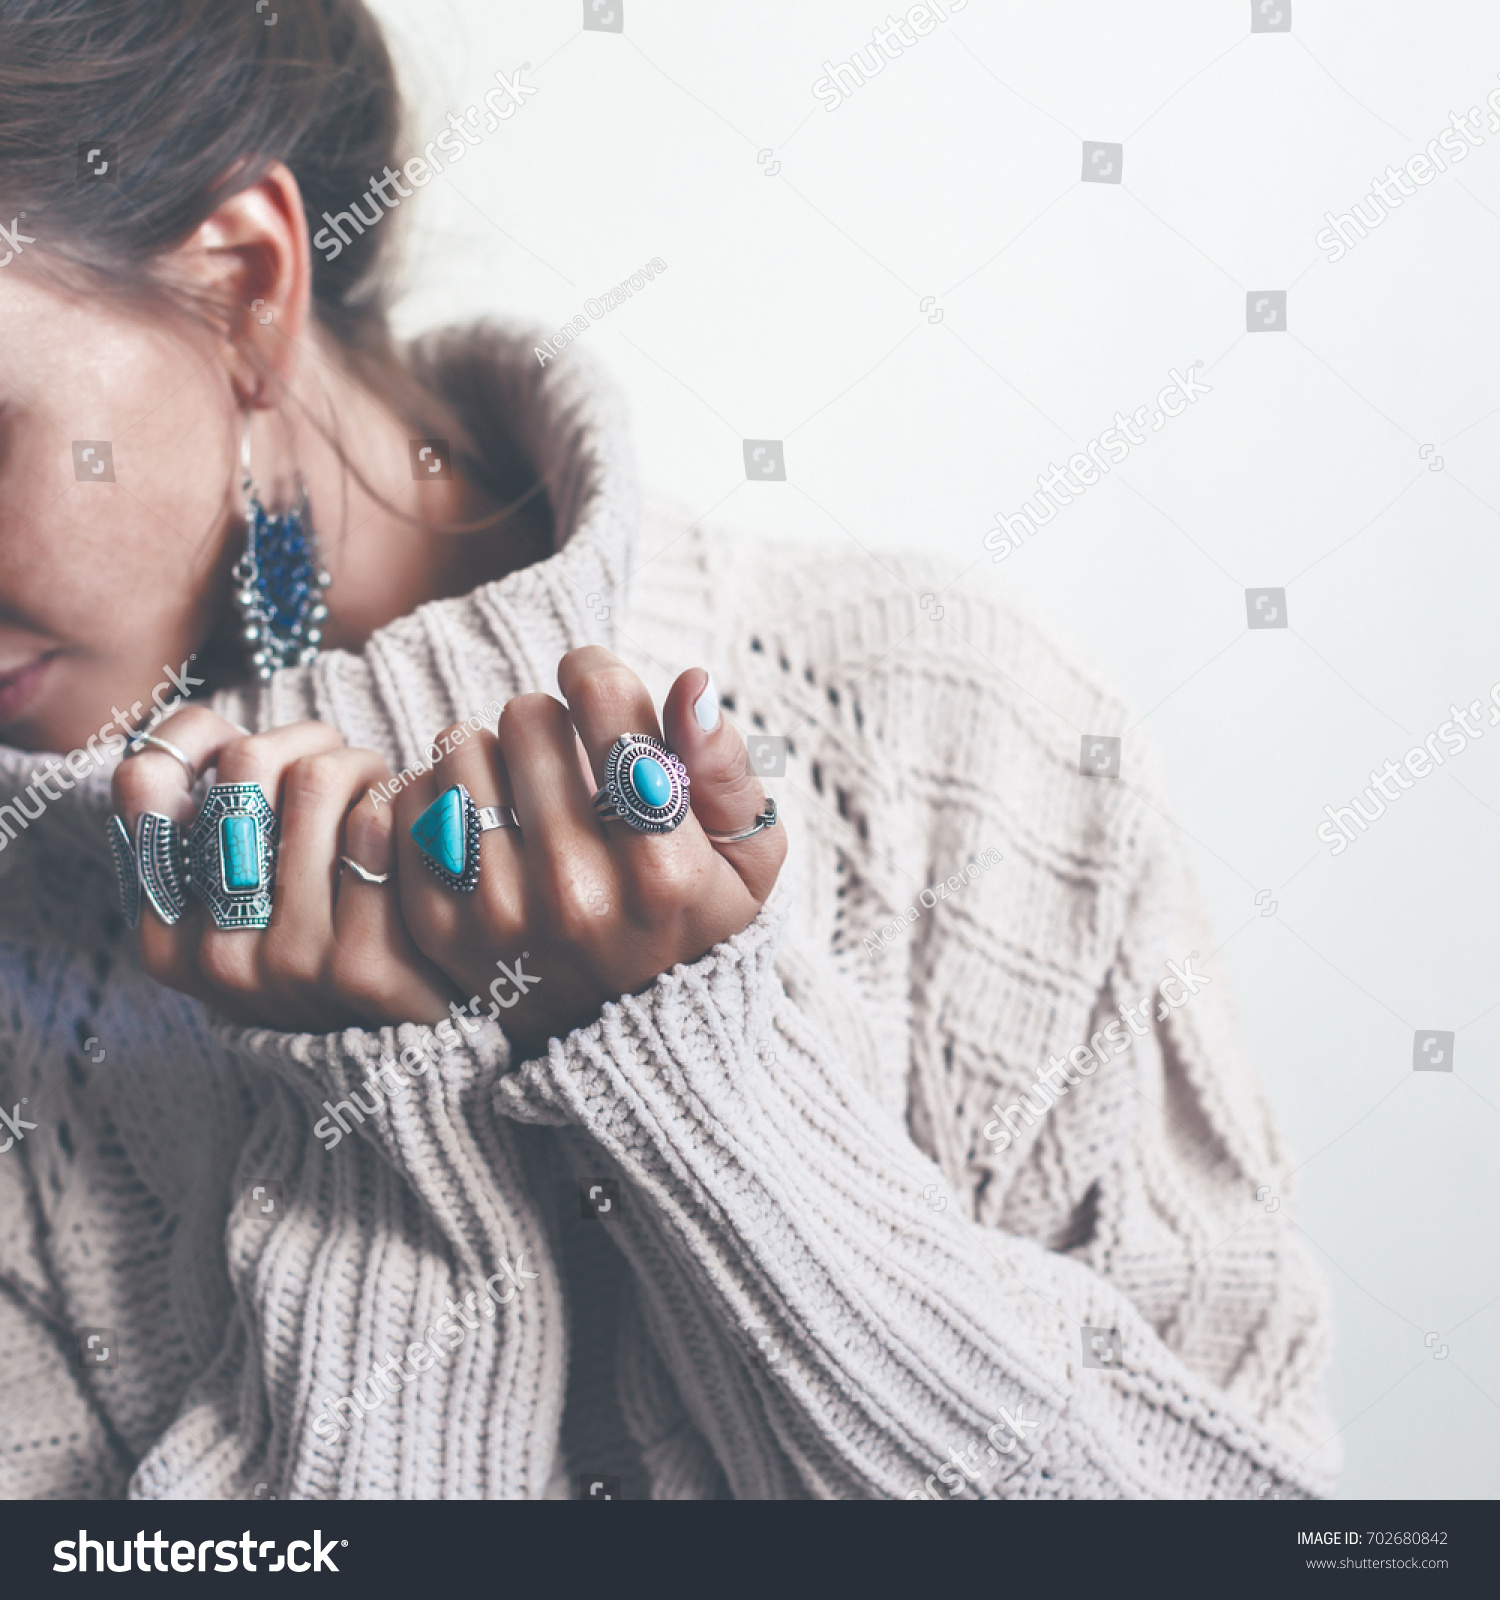 Boho jewelry on model: ethnic stone rings and earrings. Beautiful woman wearing warm woolen sweater and fashion jewellery. Minimal style and pastel tone. #702680842